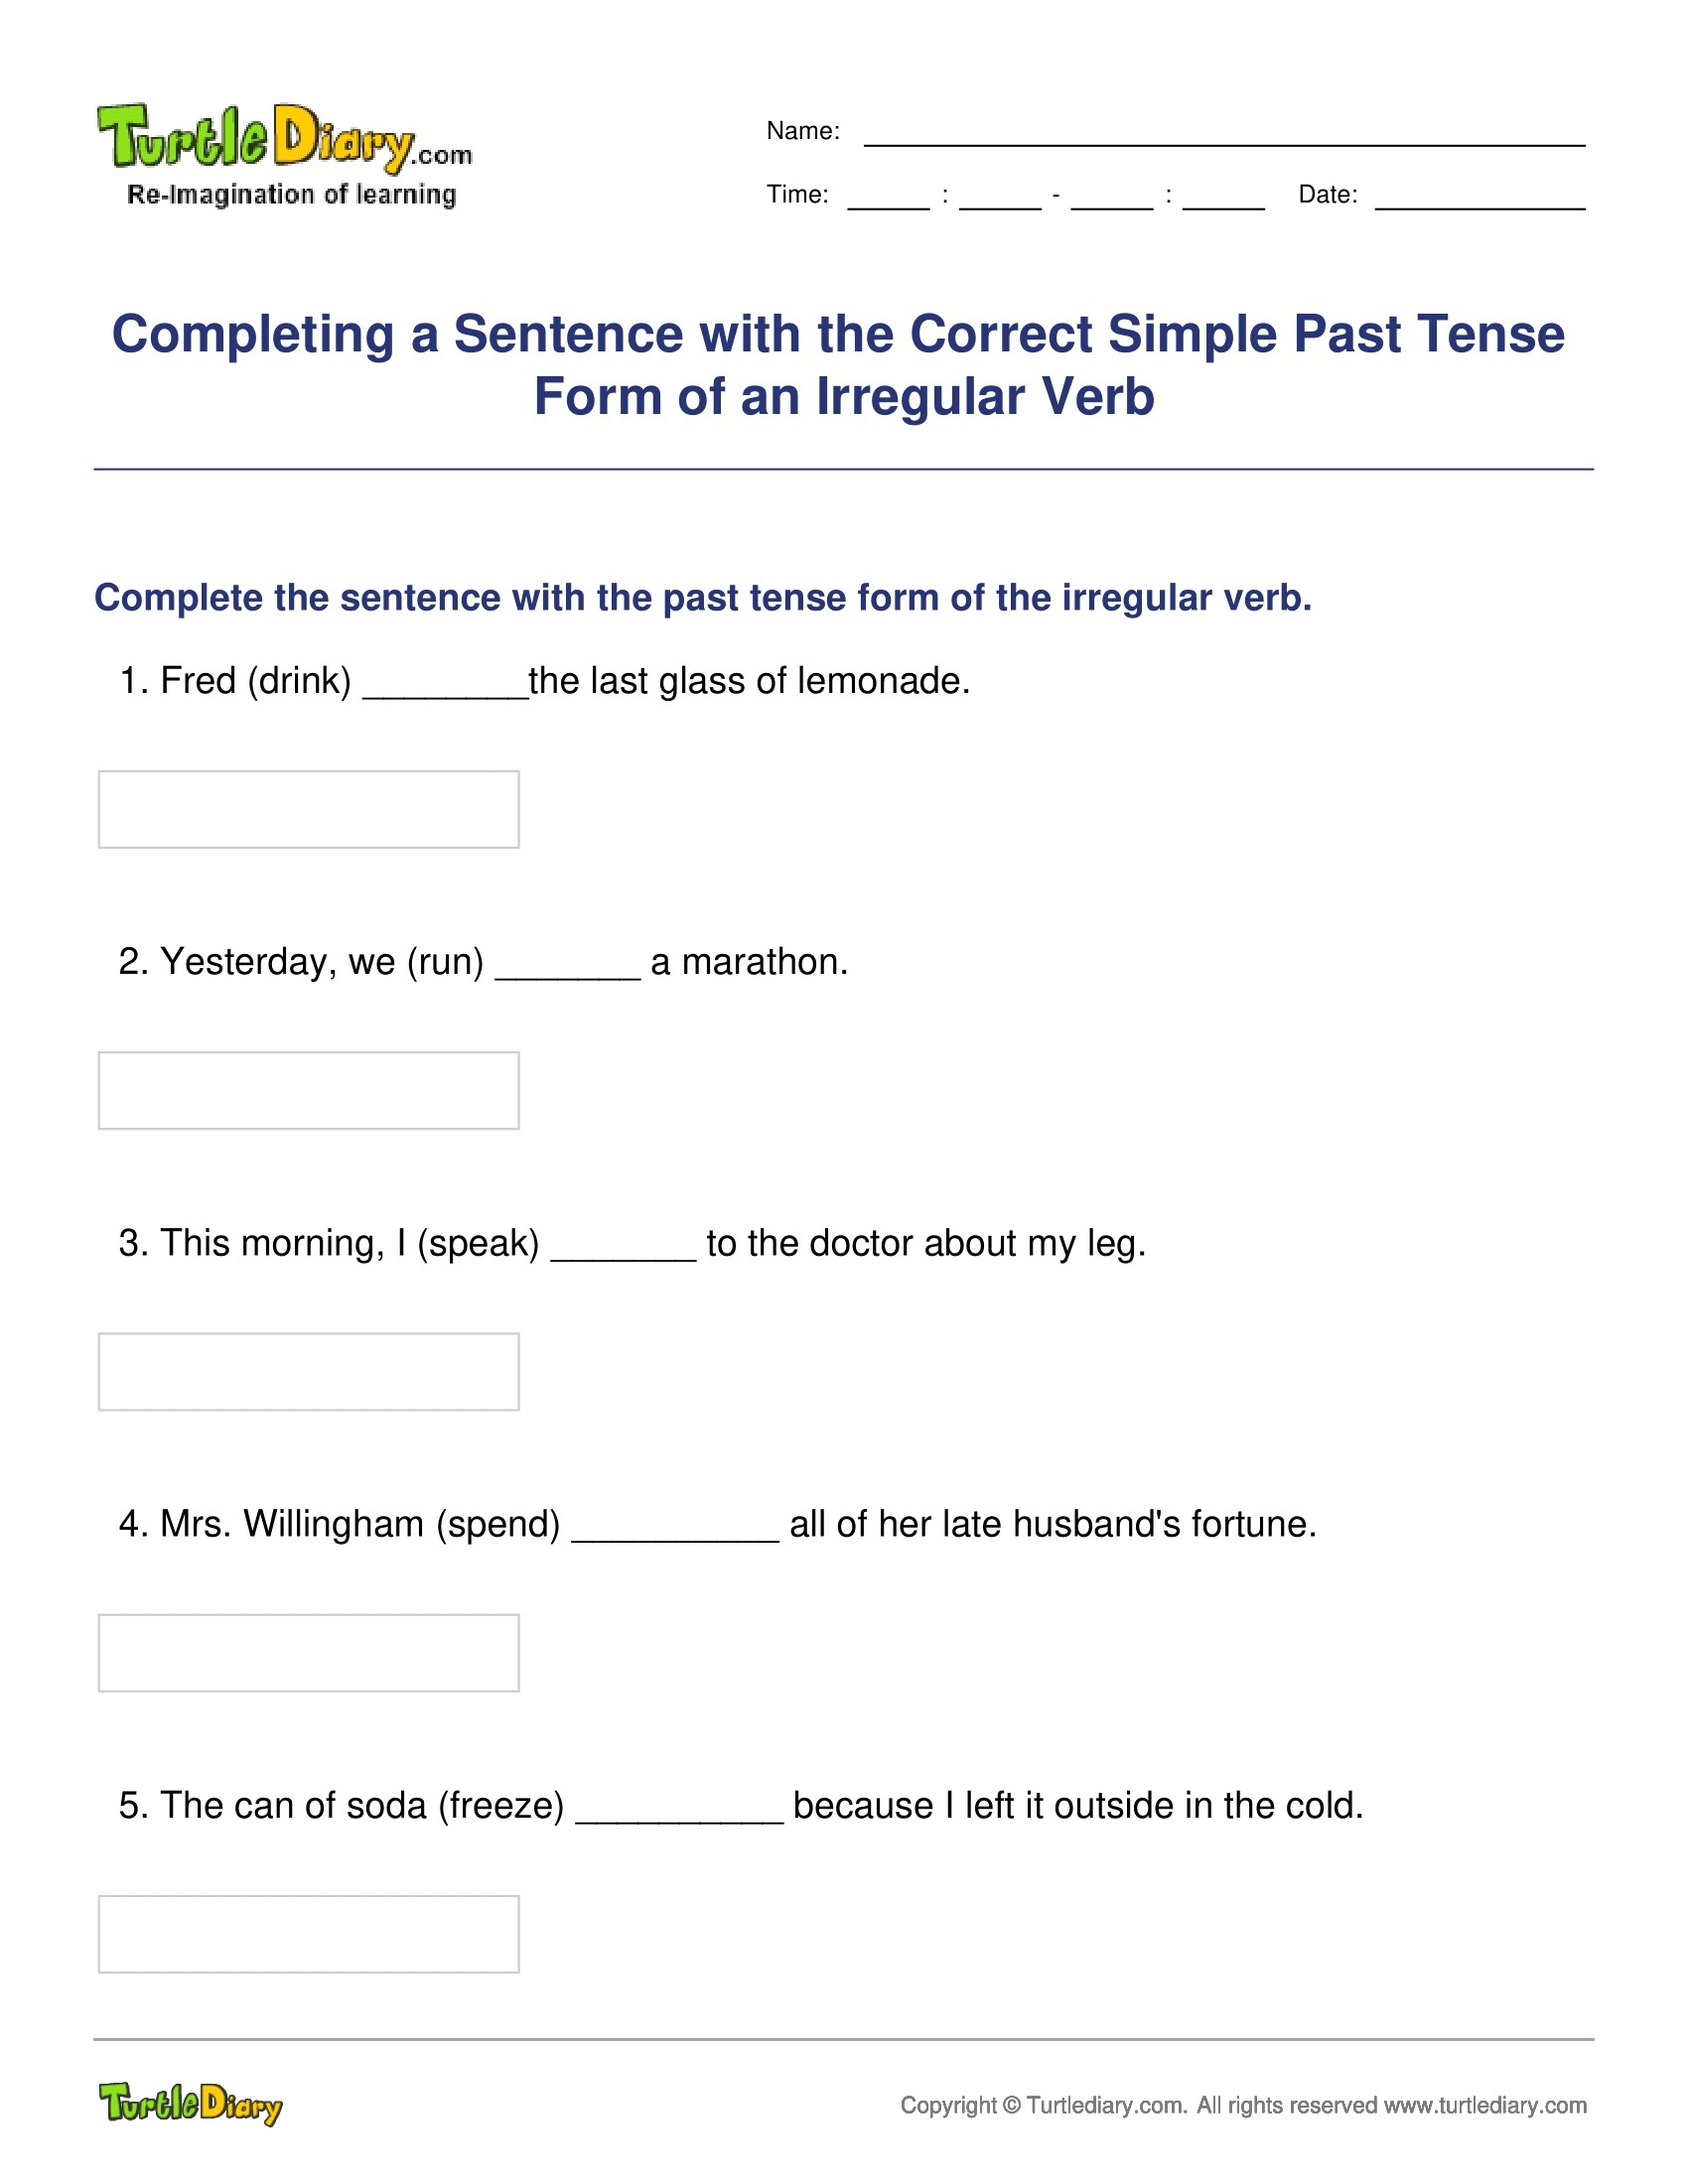 Completing a Sentence with the Correct Simple Past Tense Form of an Irregular Verb